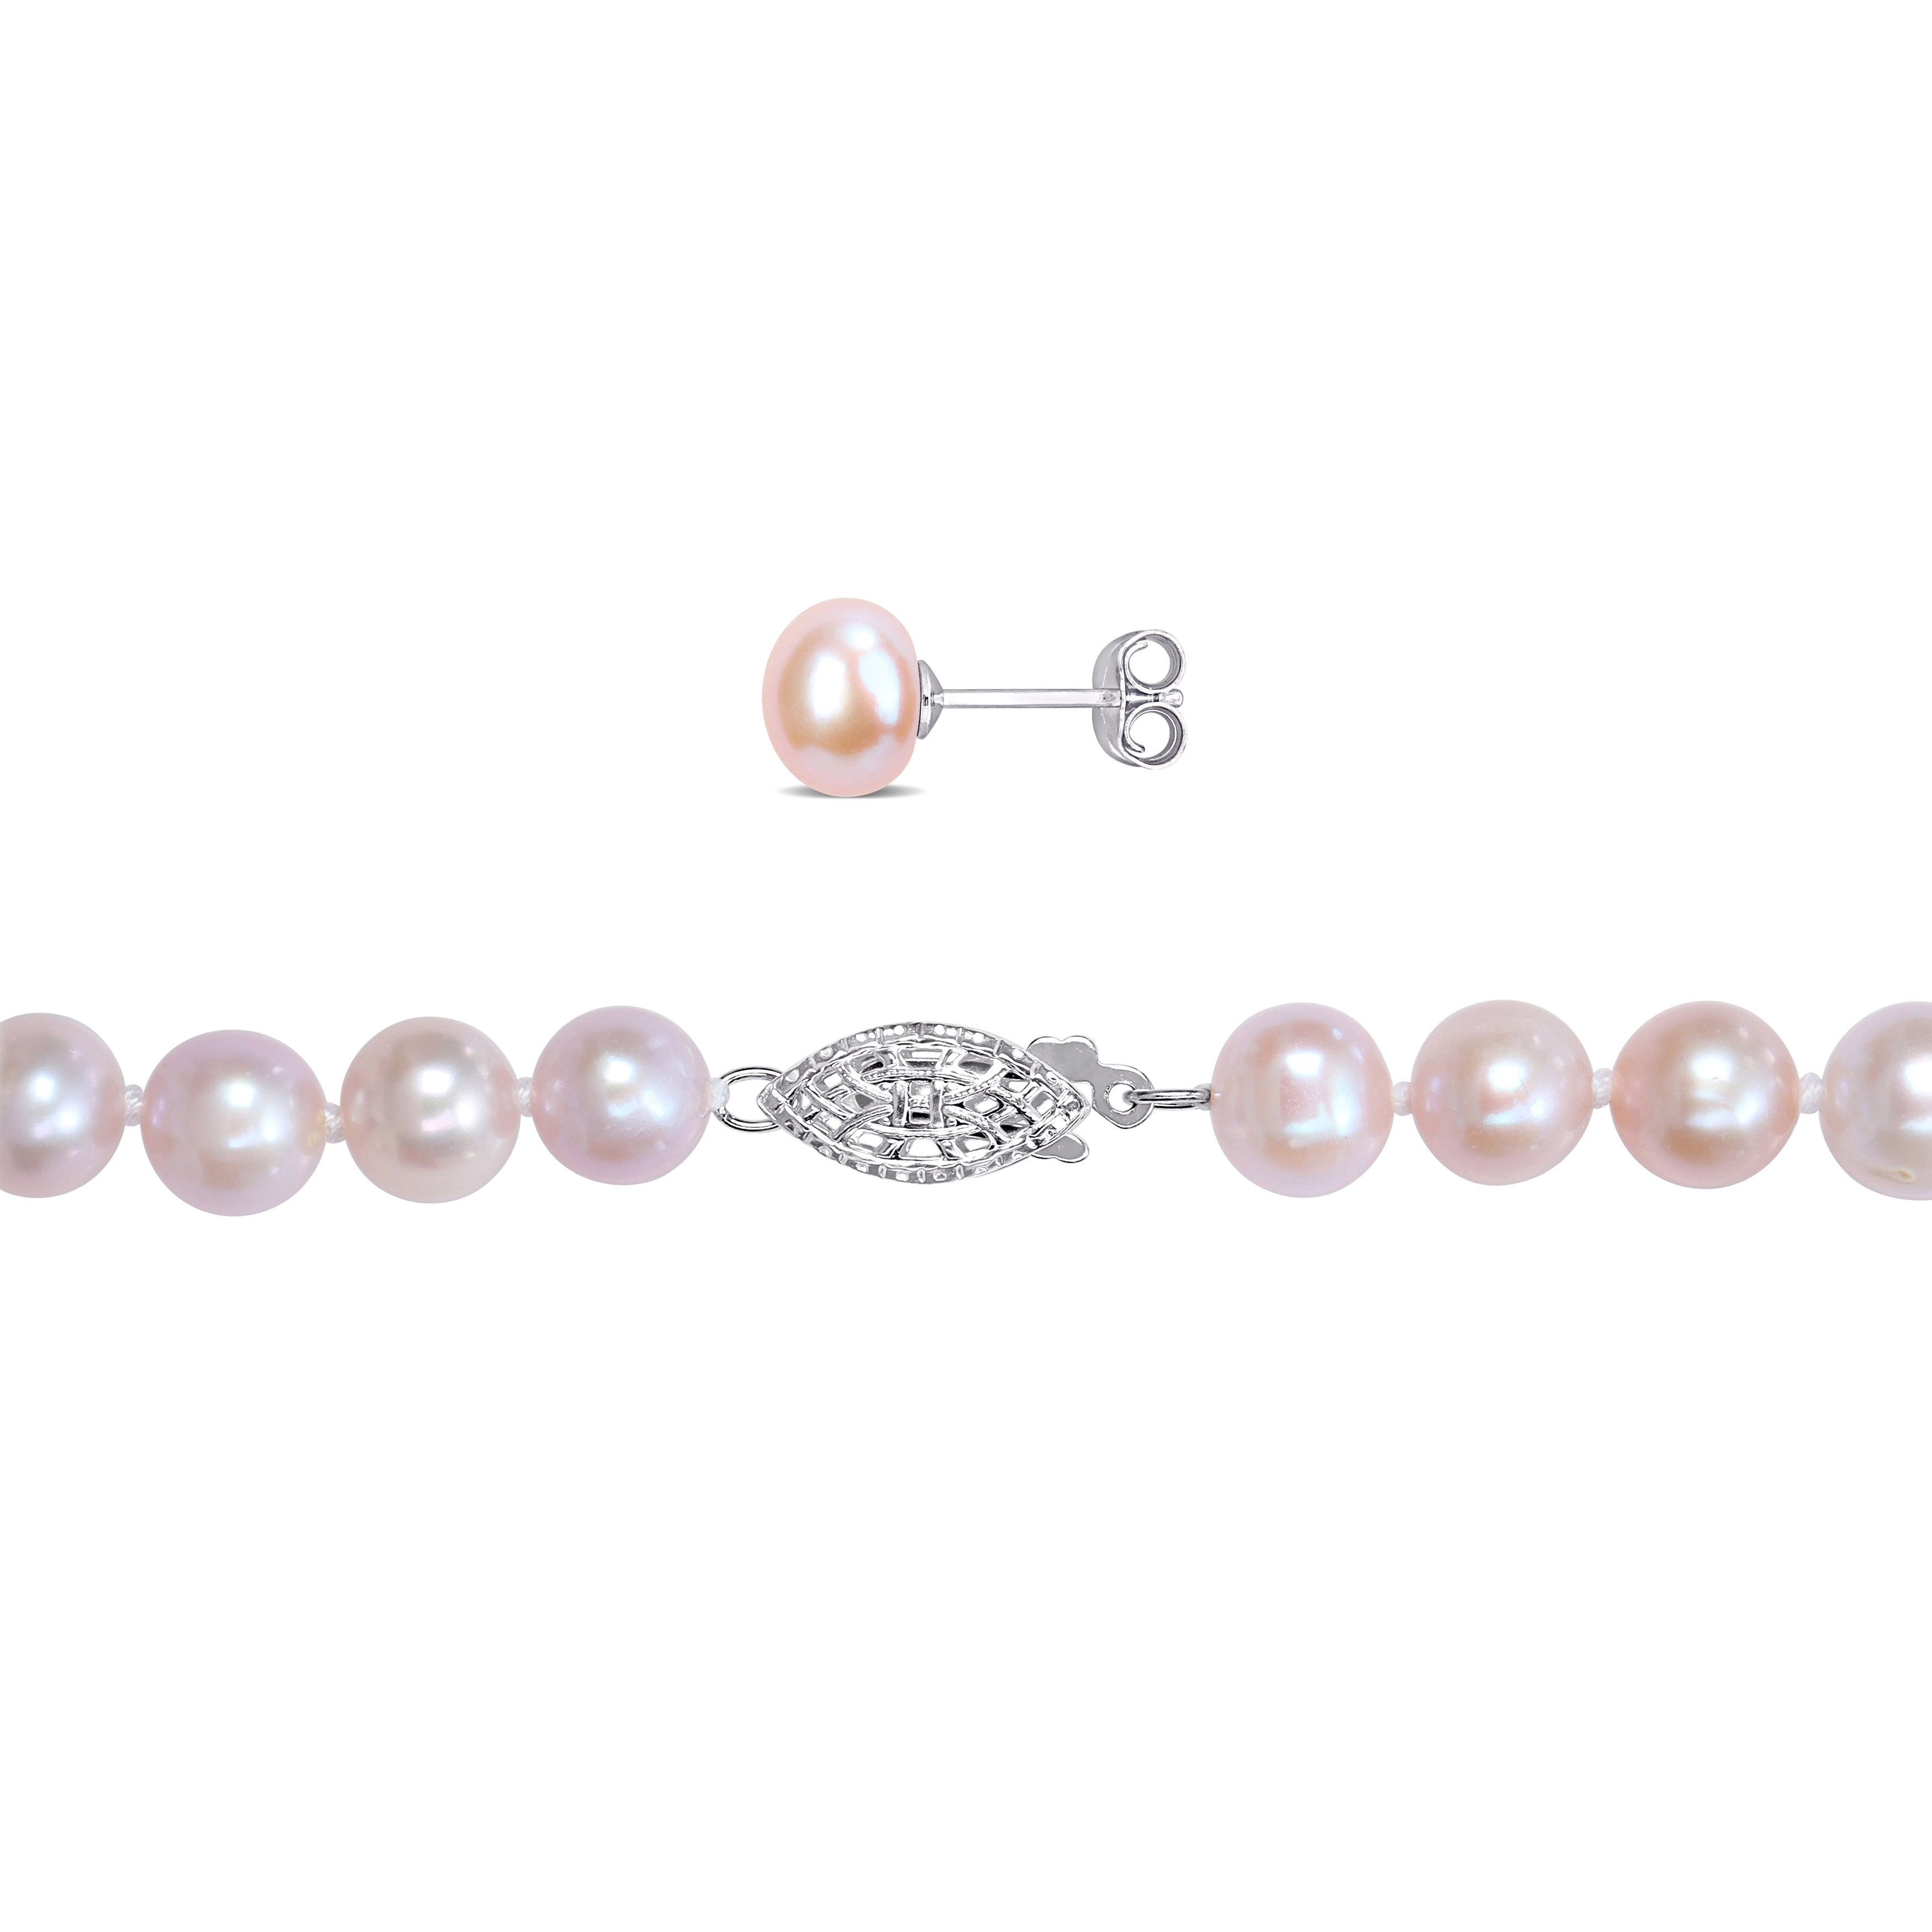 6.5-8 MM Pink Cultured Freshwater Pearl 3-Piece Set of Strand Necklace Stretch Bracelet and Stud Earrings in Sterling Silver